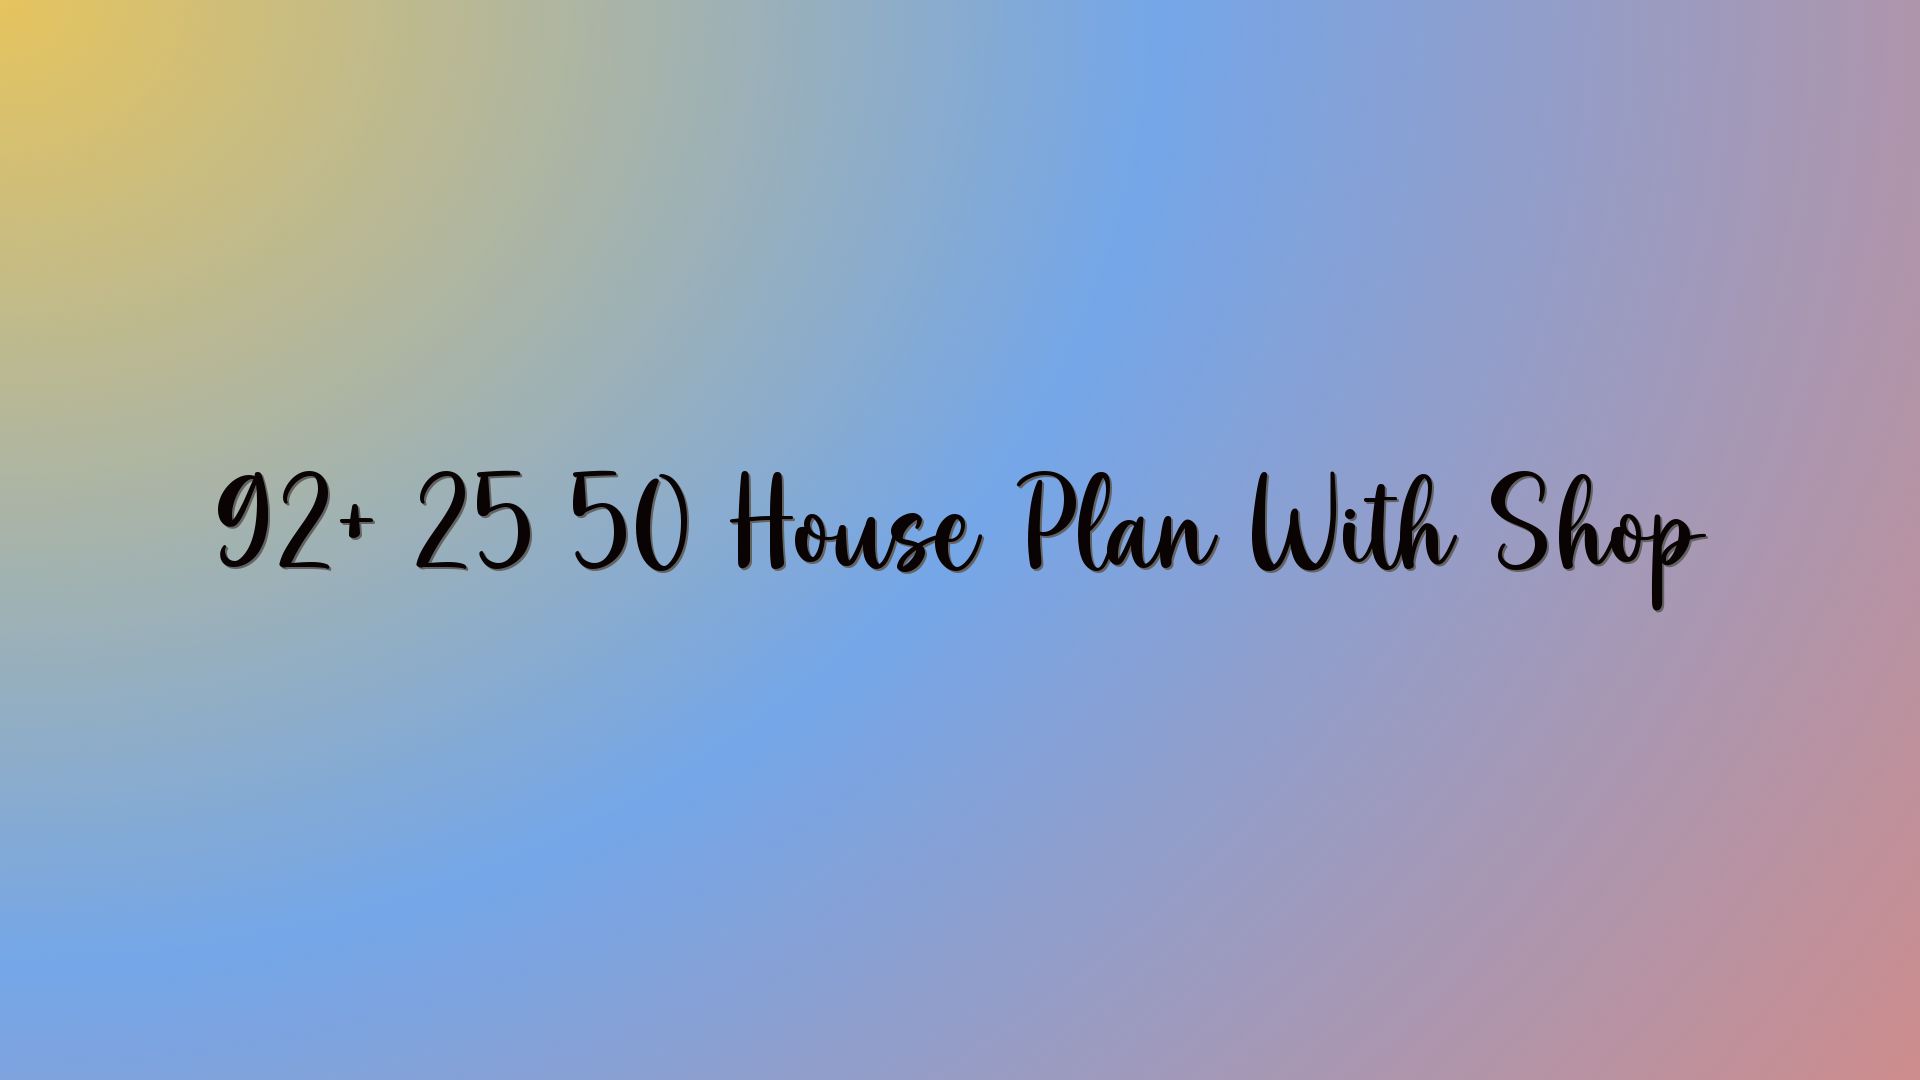 92+ 25 50 House Plan With Shop